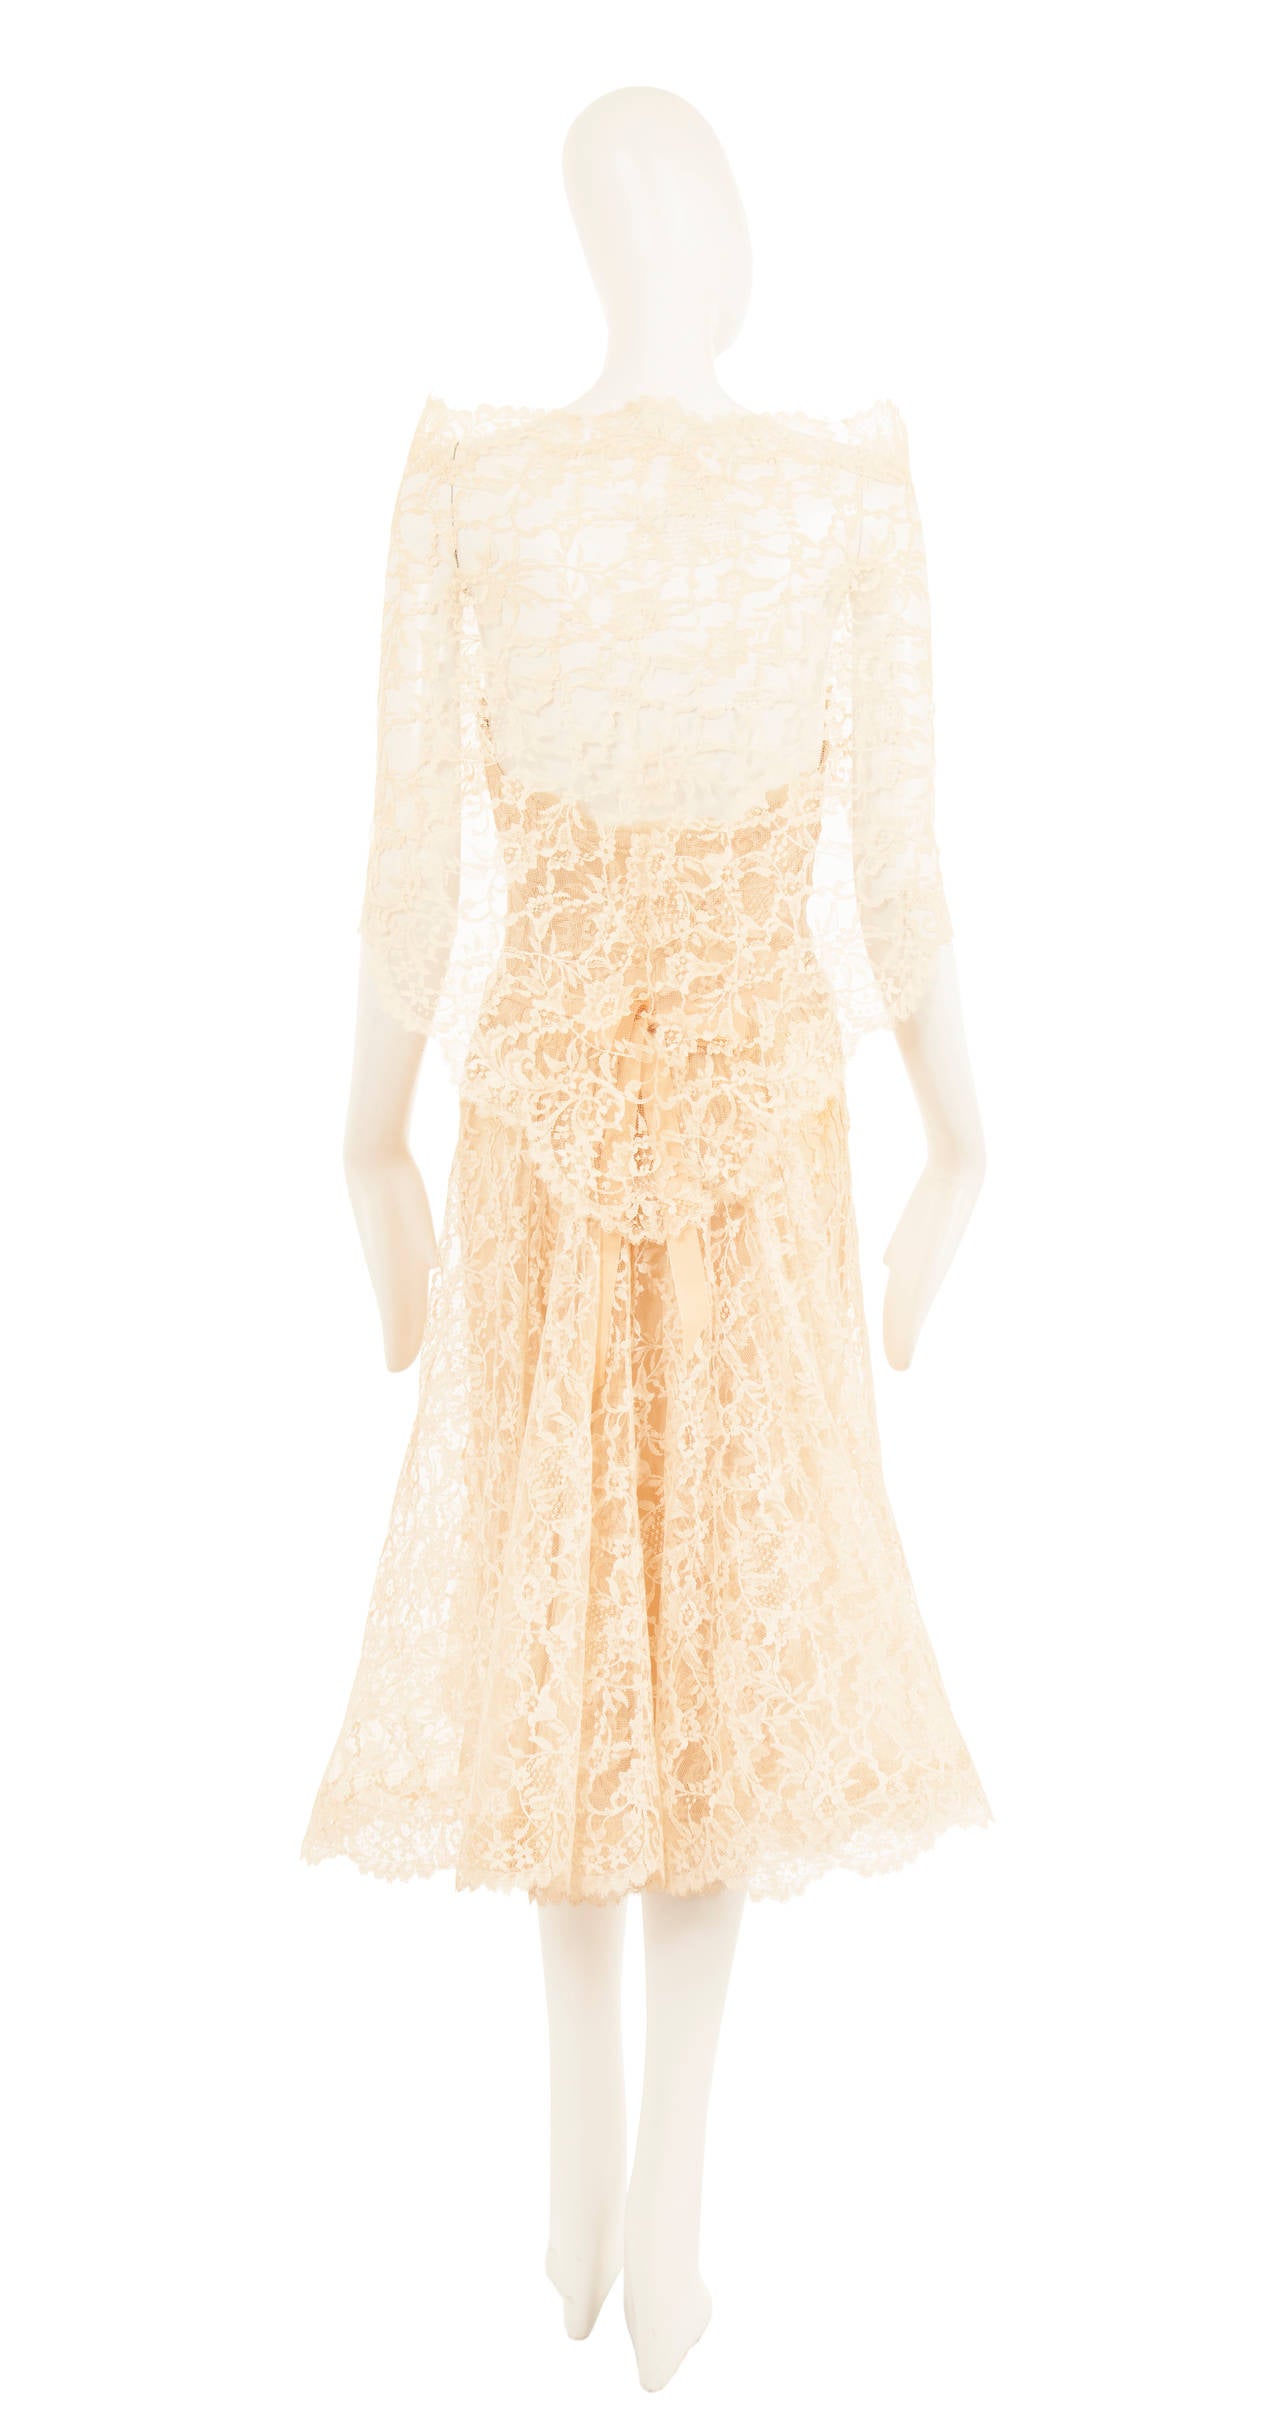 Women's Chanel Haute Couture ivory lace dress, Circa 1955 For Sale